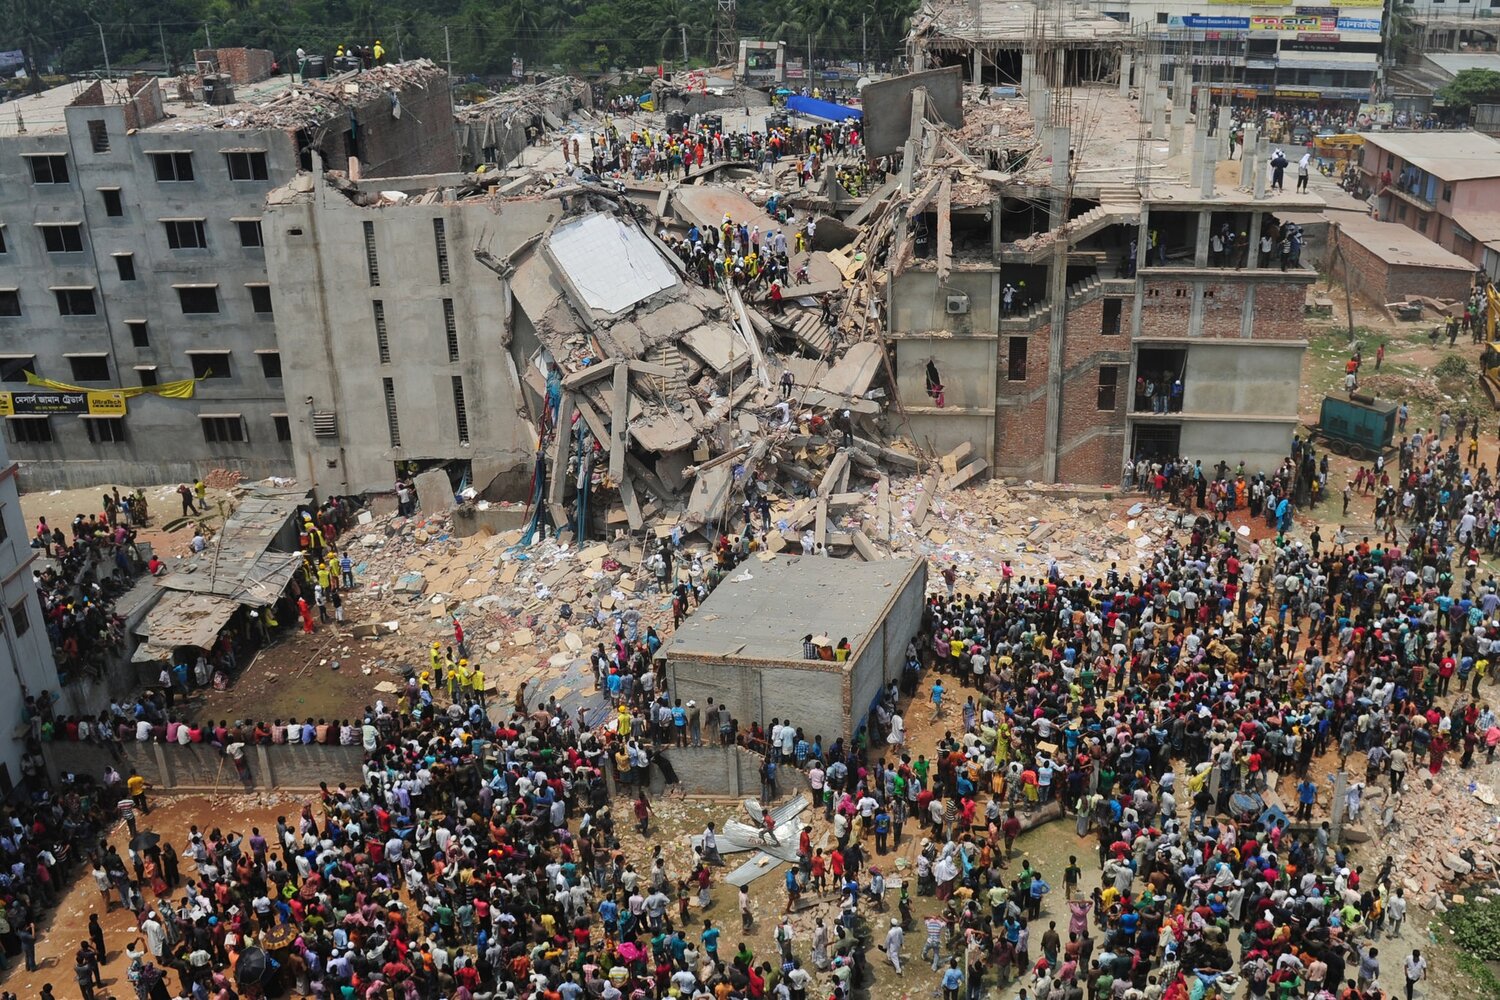 https://www.nytimes.com/2013/05/23/world/asia/report-on-bangladesh-building-collapse-finds-widespread-blame.html